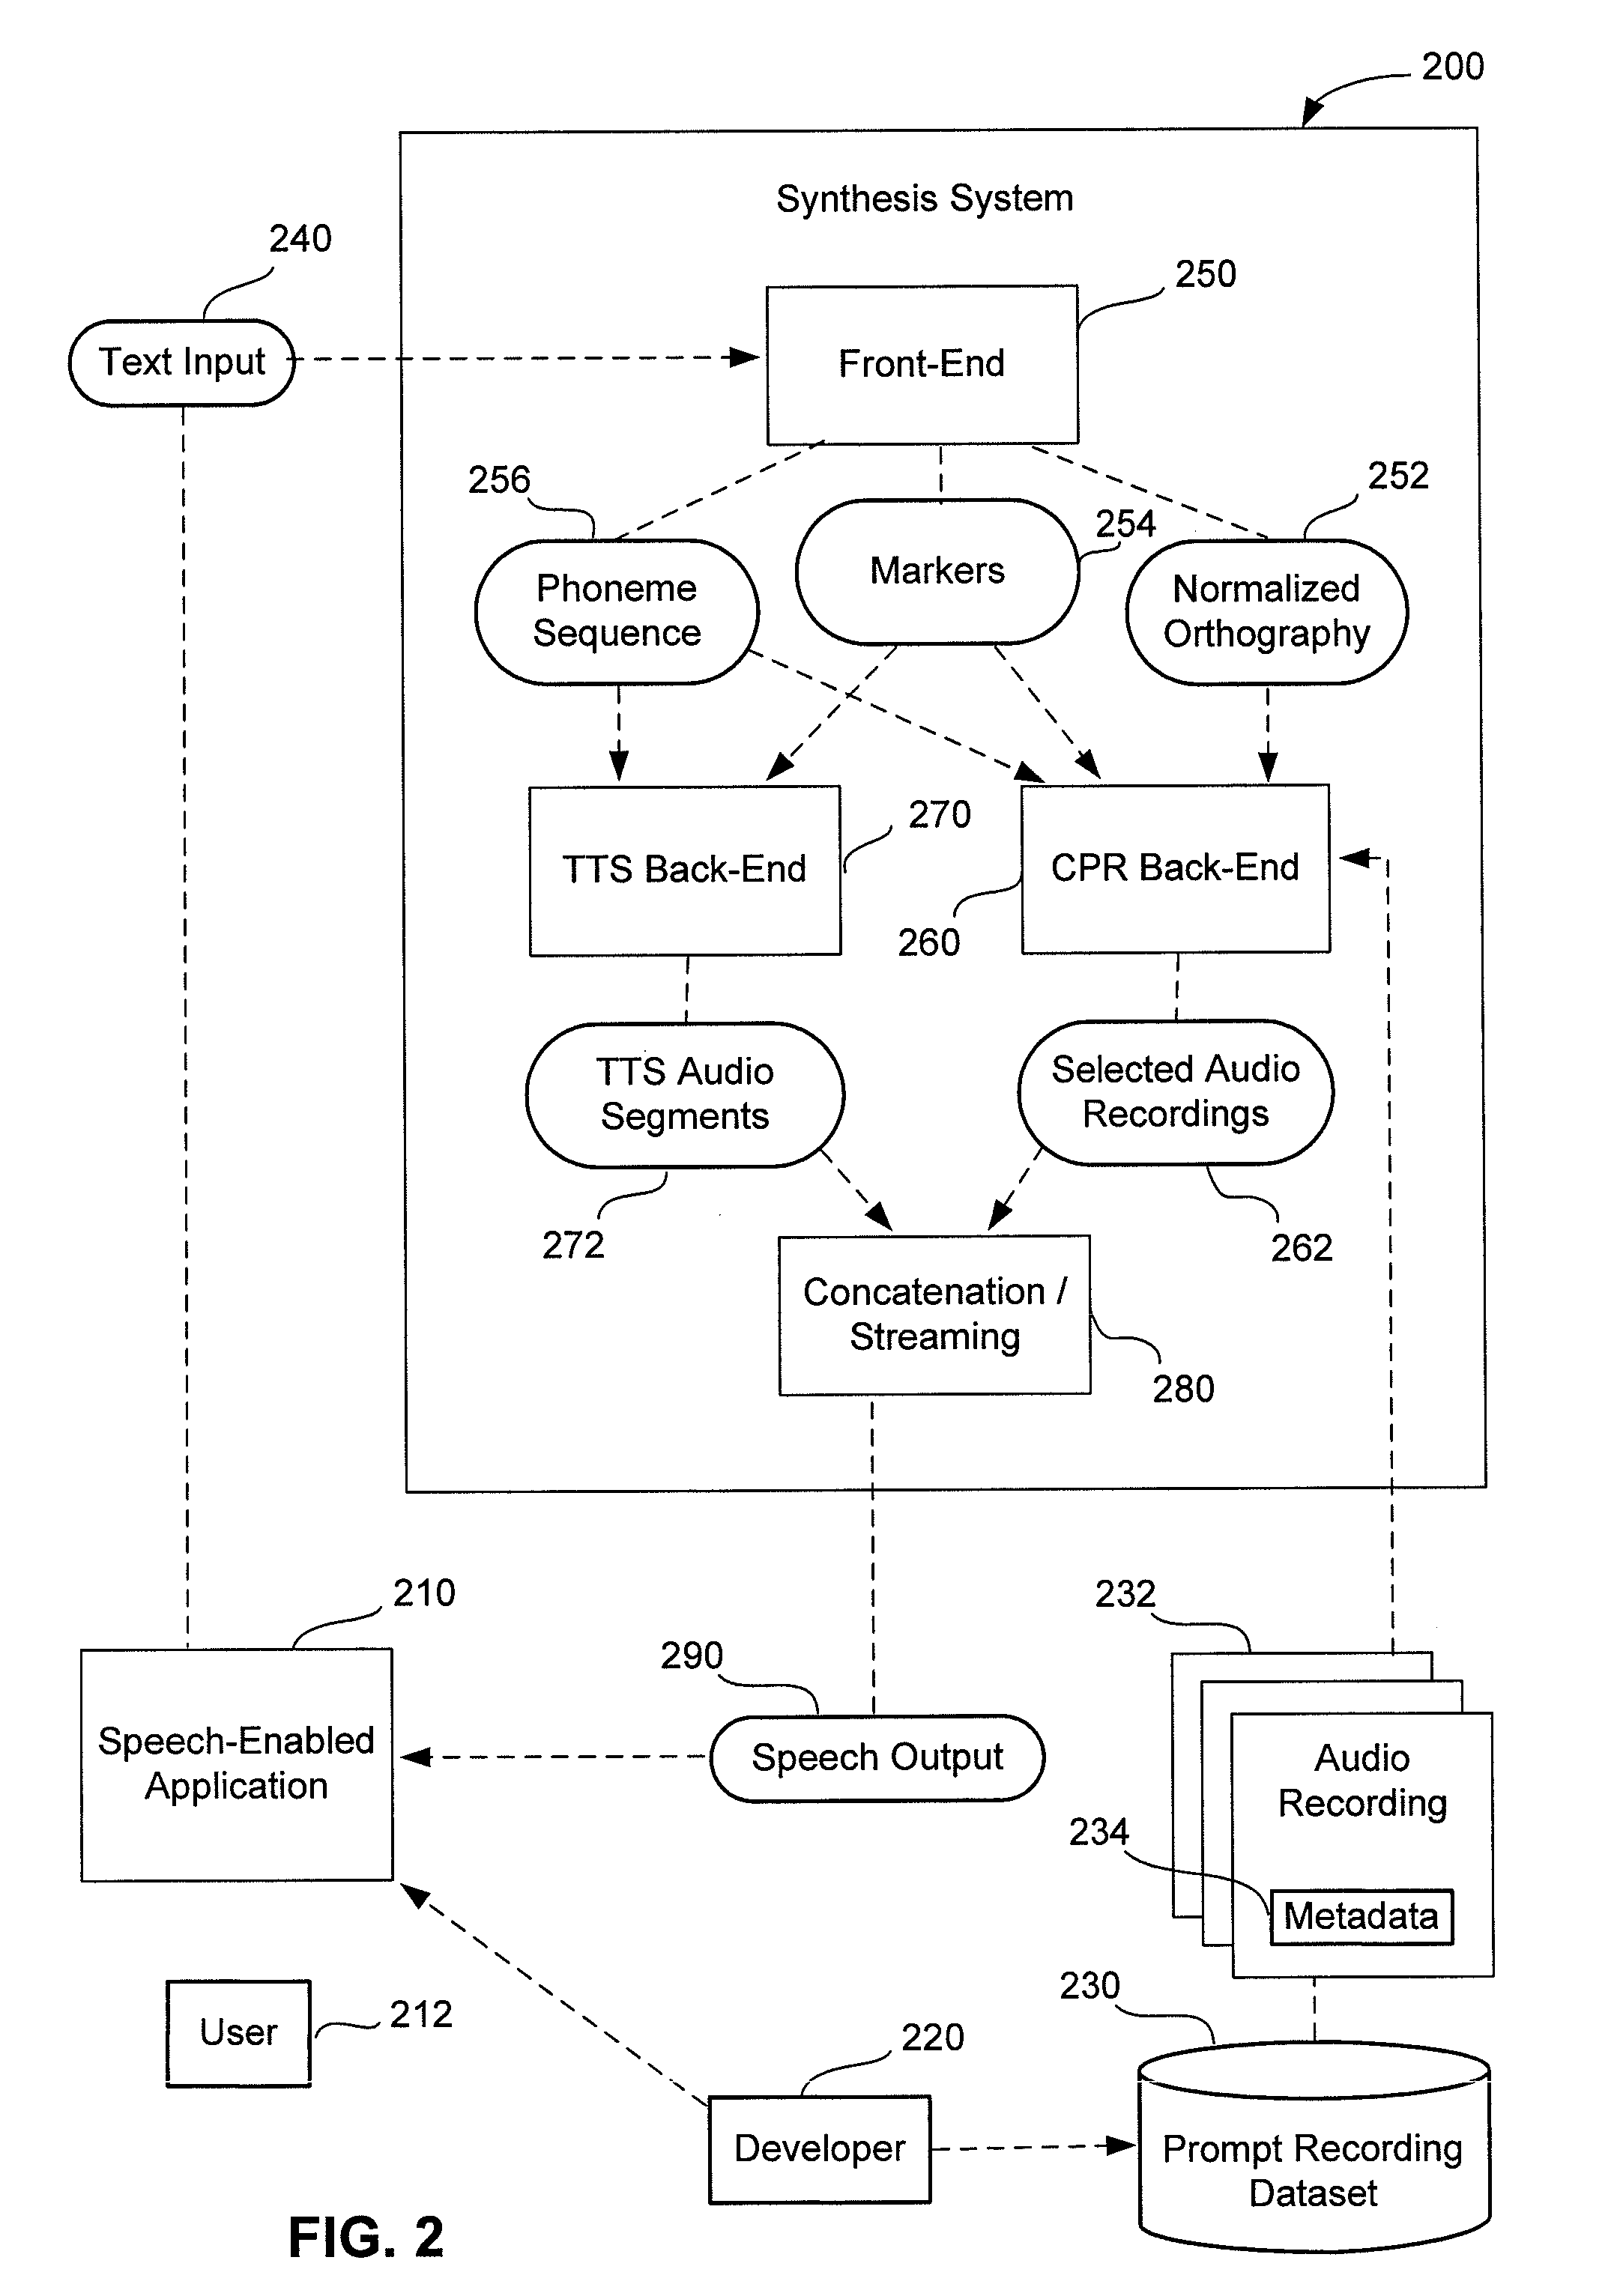 Method and apparatus for providing speech output for speech-enabled applications